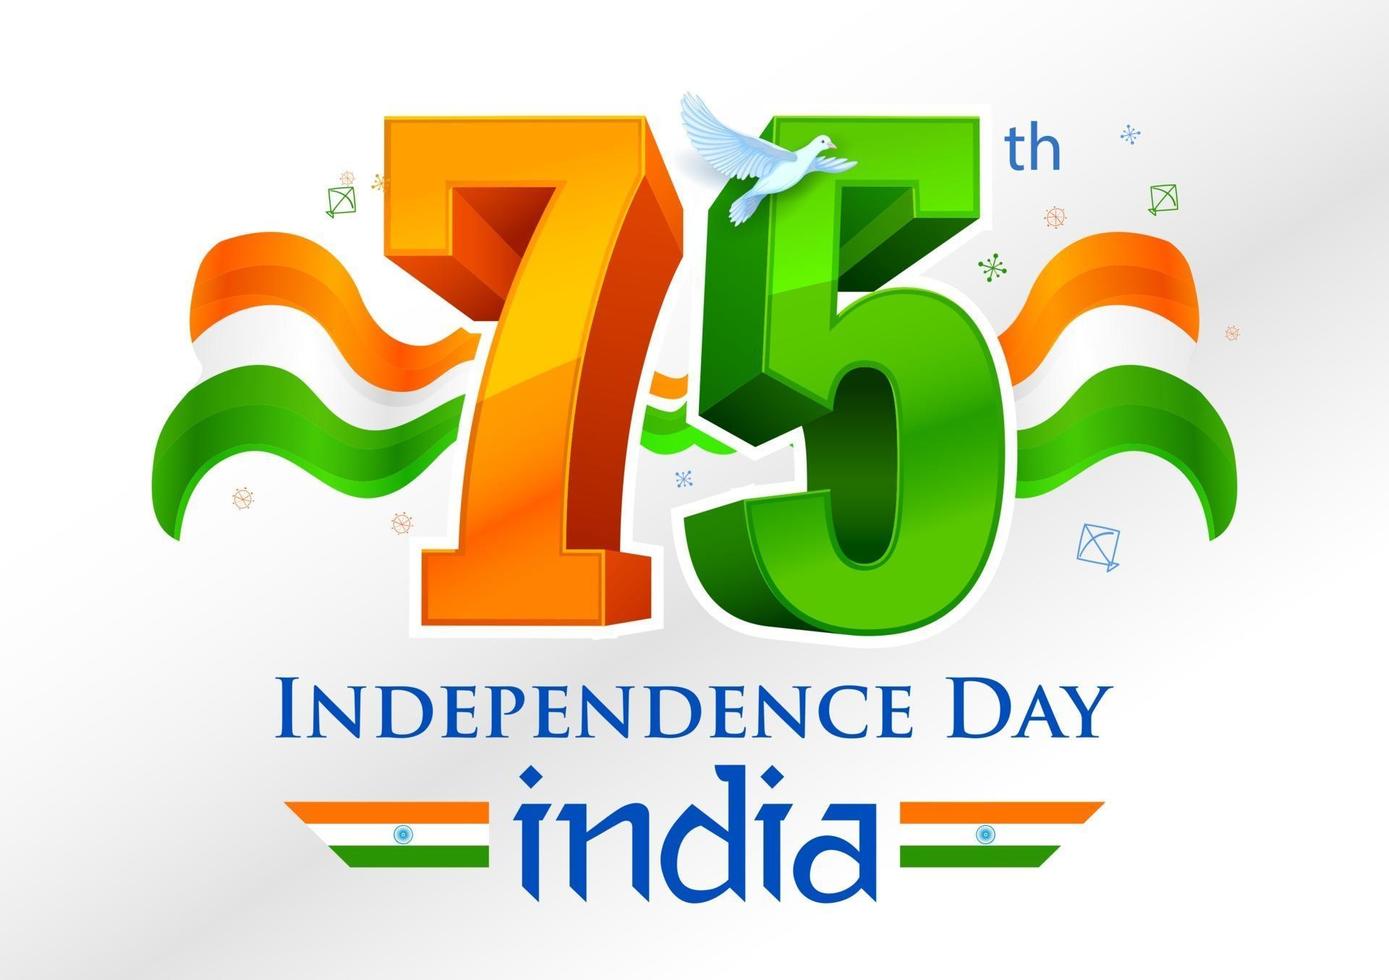 Tricolor for 75th Independence Day of India on 15th August